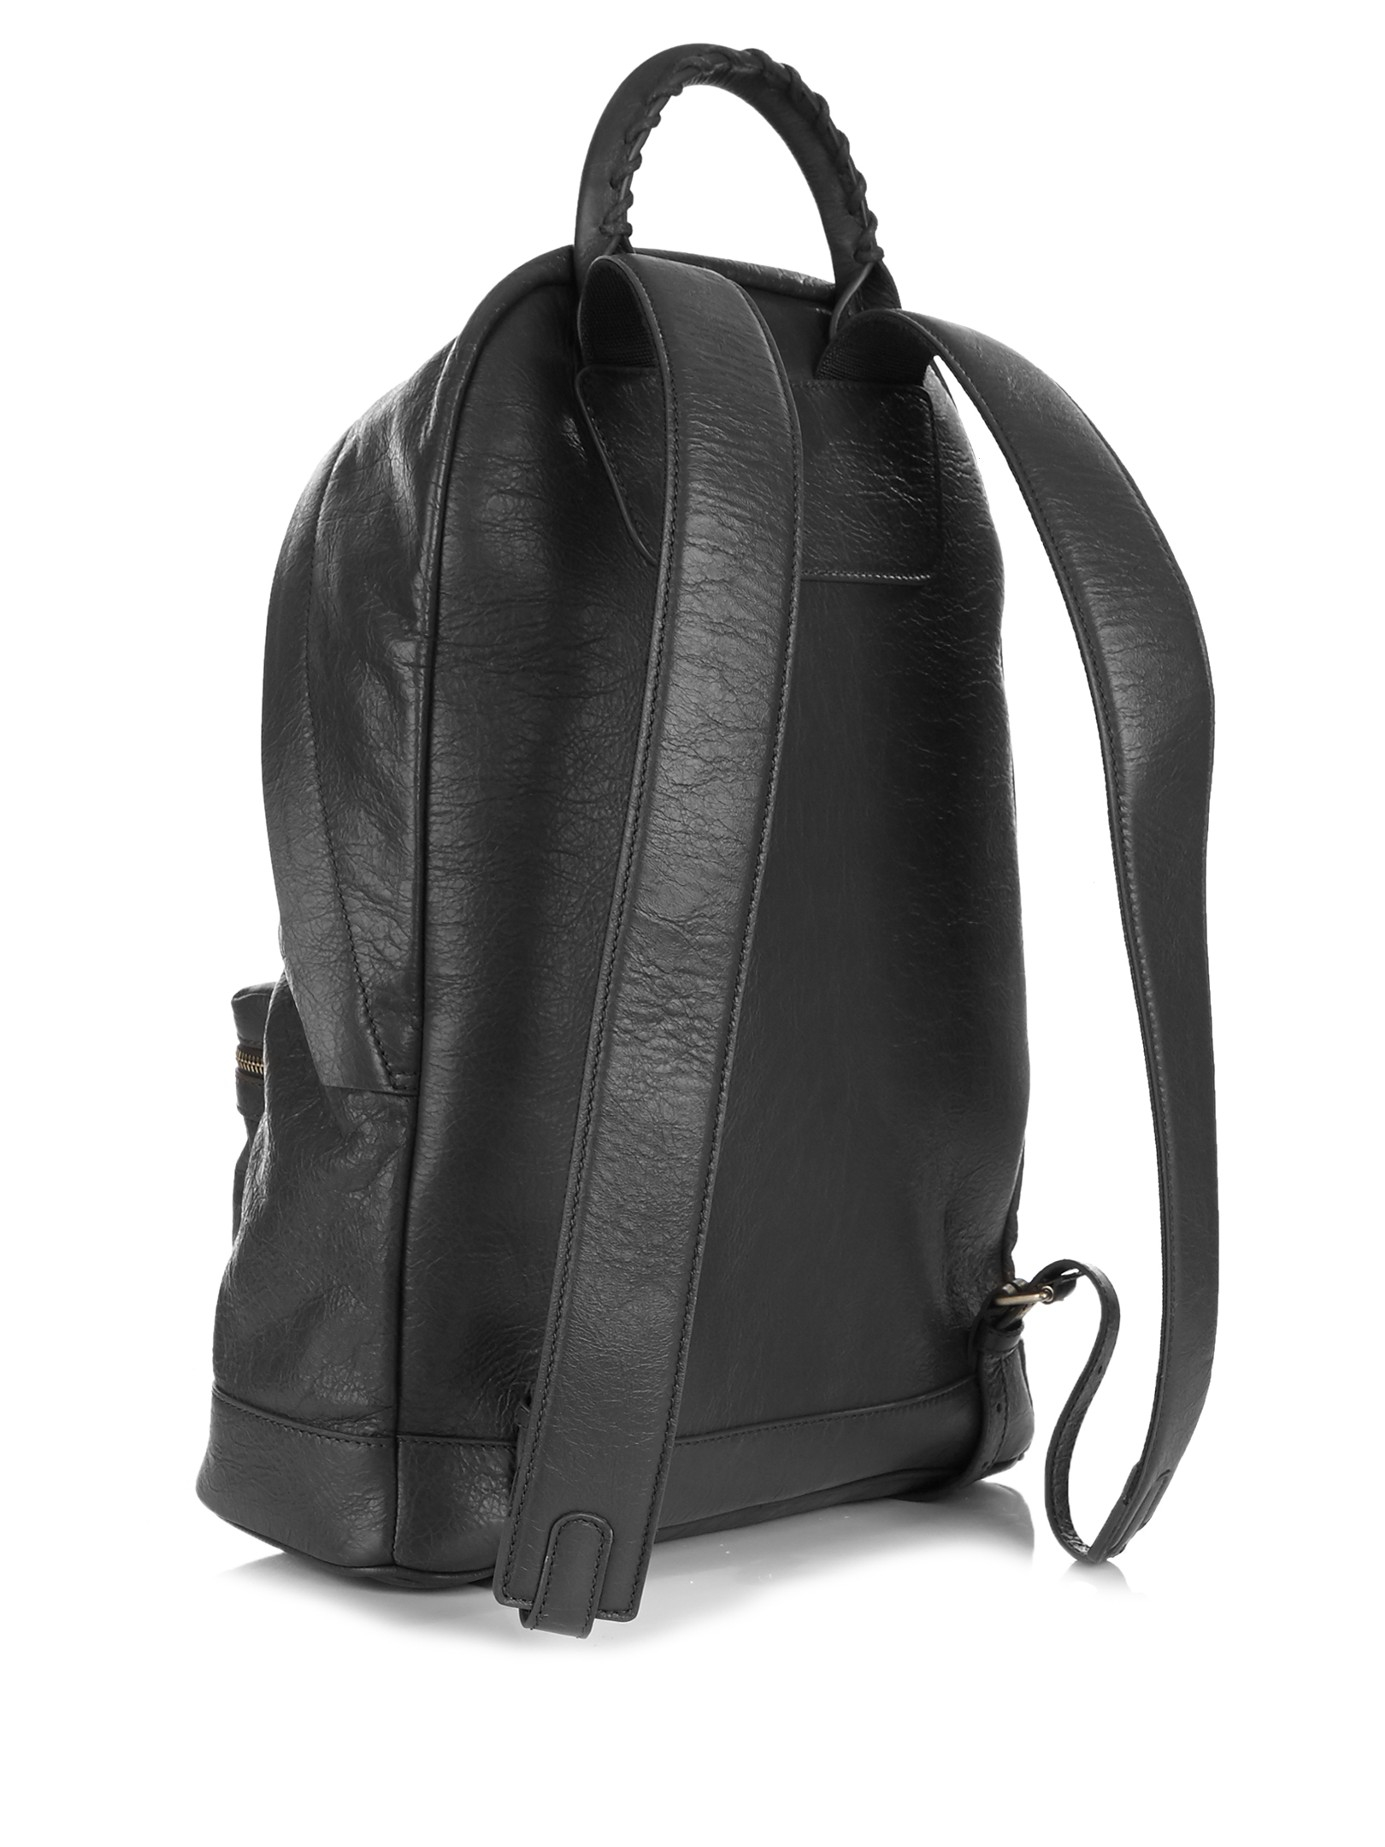 Lyst - Balenciaga Leather Backpack in Gray for Men